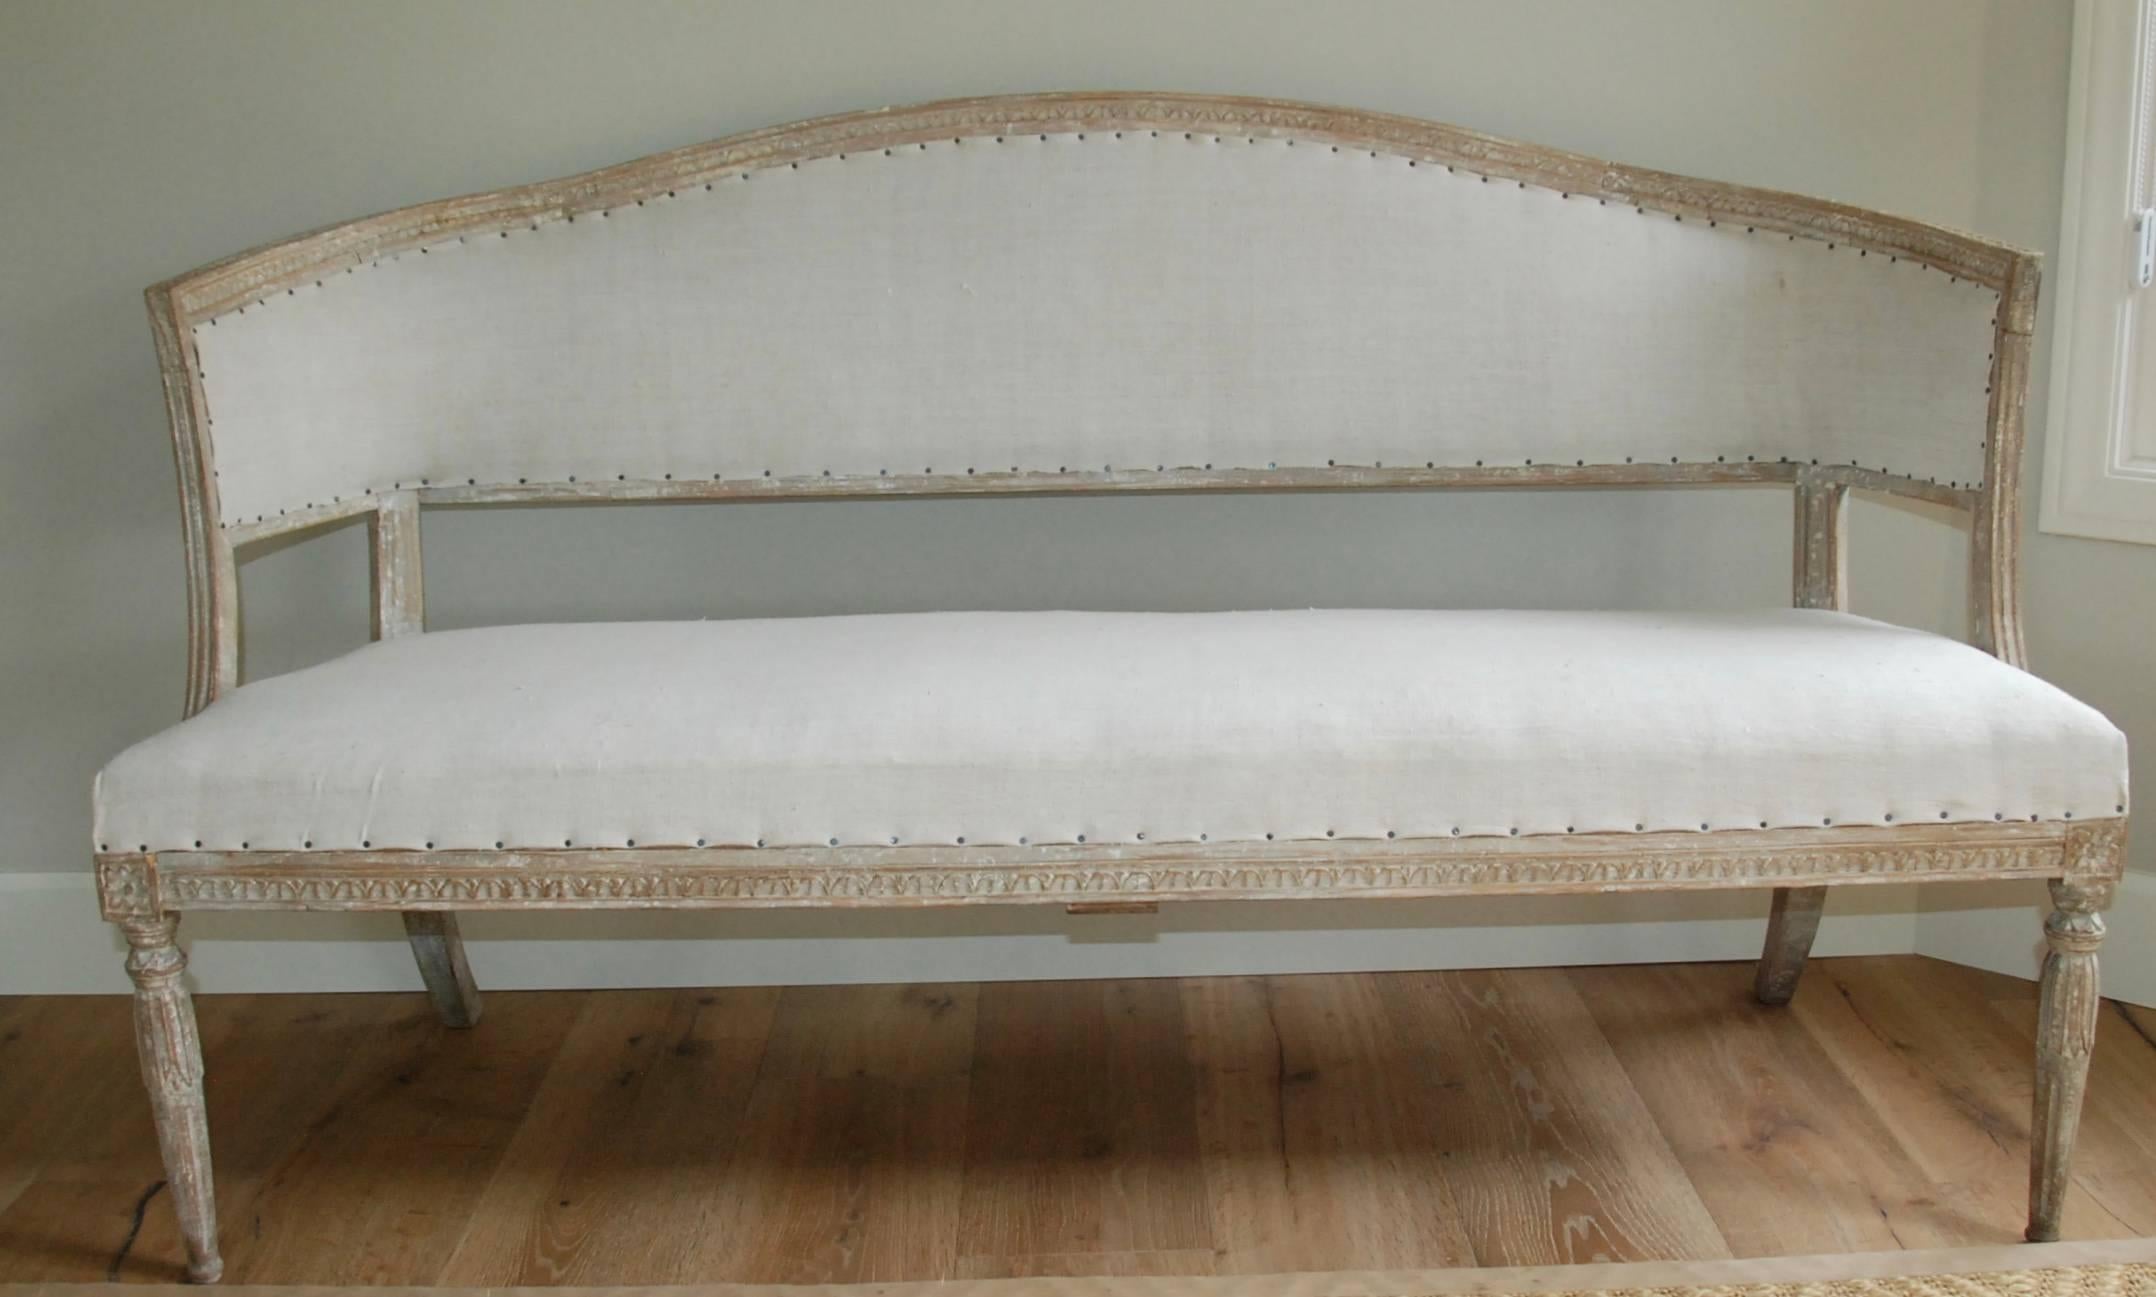 Elegant Gustavian style barrel back sofa in scraped down cream white color. Lovely tapered carved legs and arms. Extra detail of beautiful carving along top crest of sofa, as seen in photos.